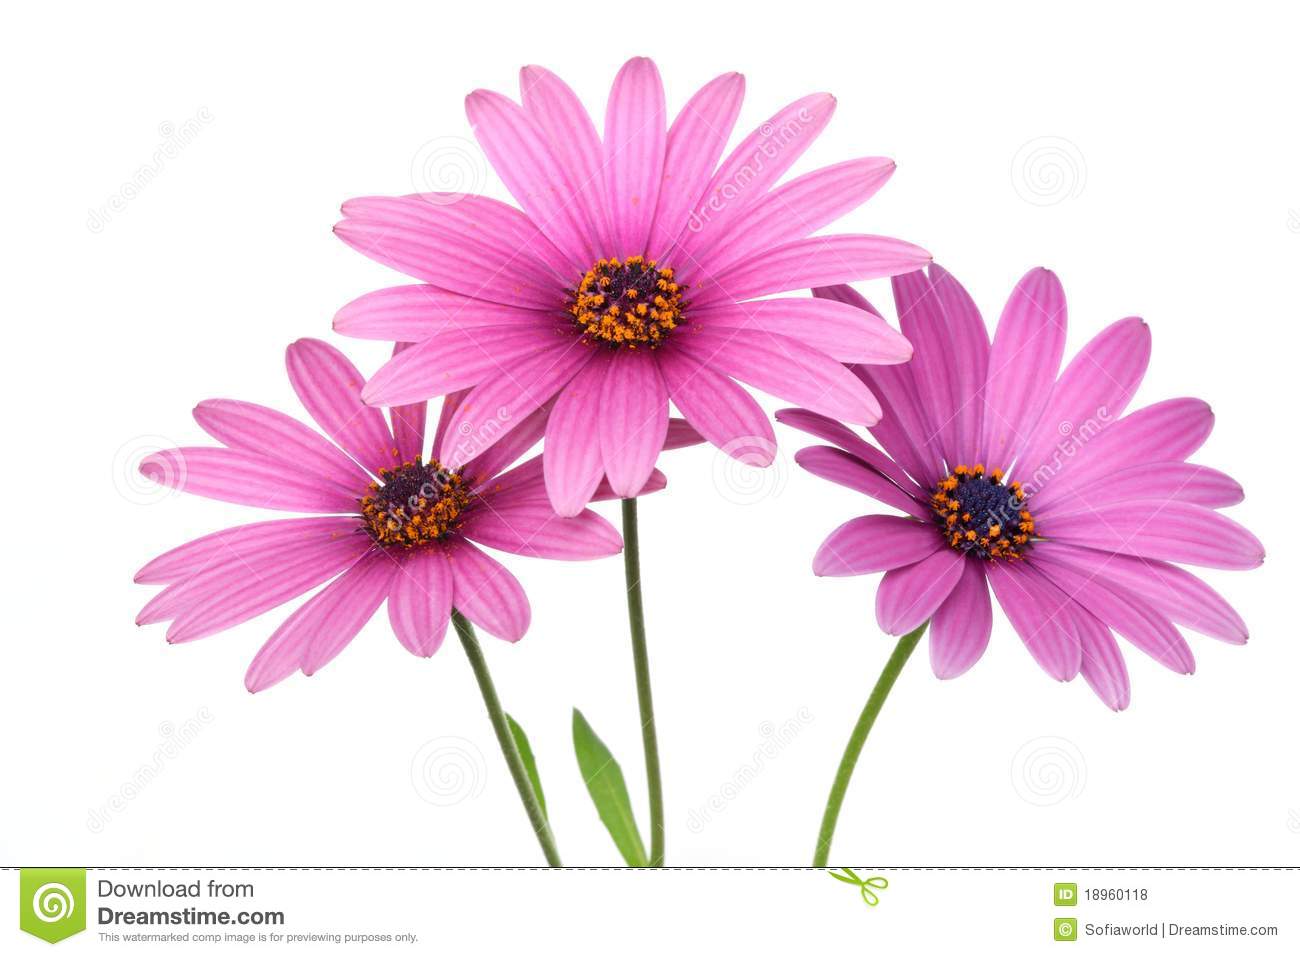 Pink Daisy Flower Royalty Free Stock Photos   Image  18960118